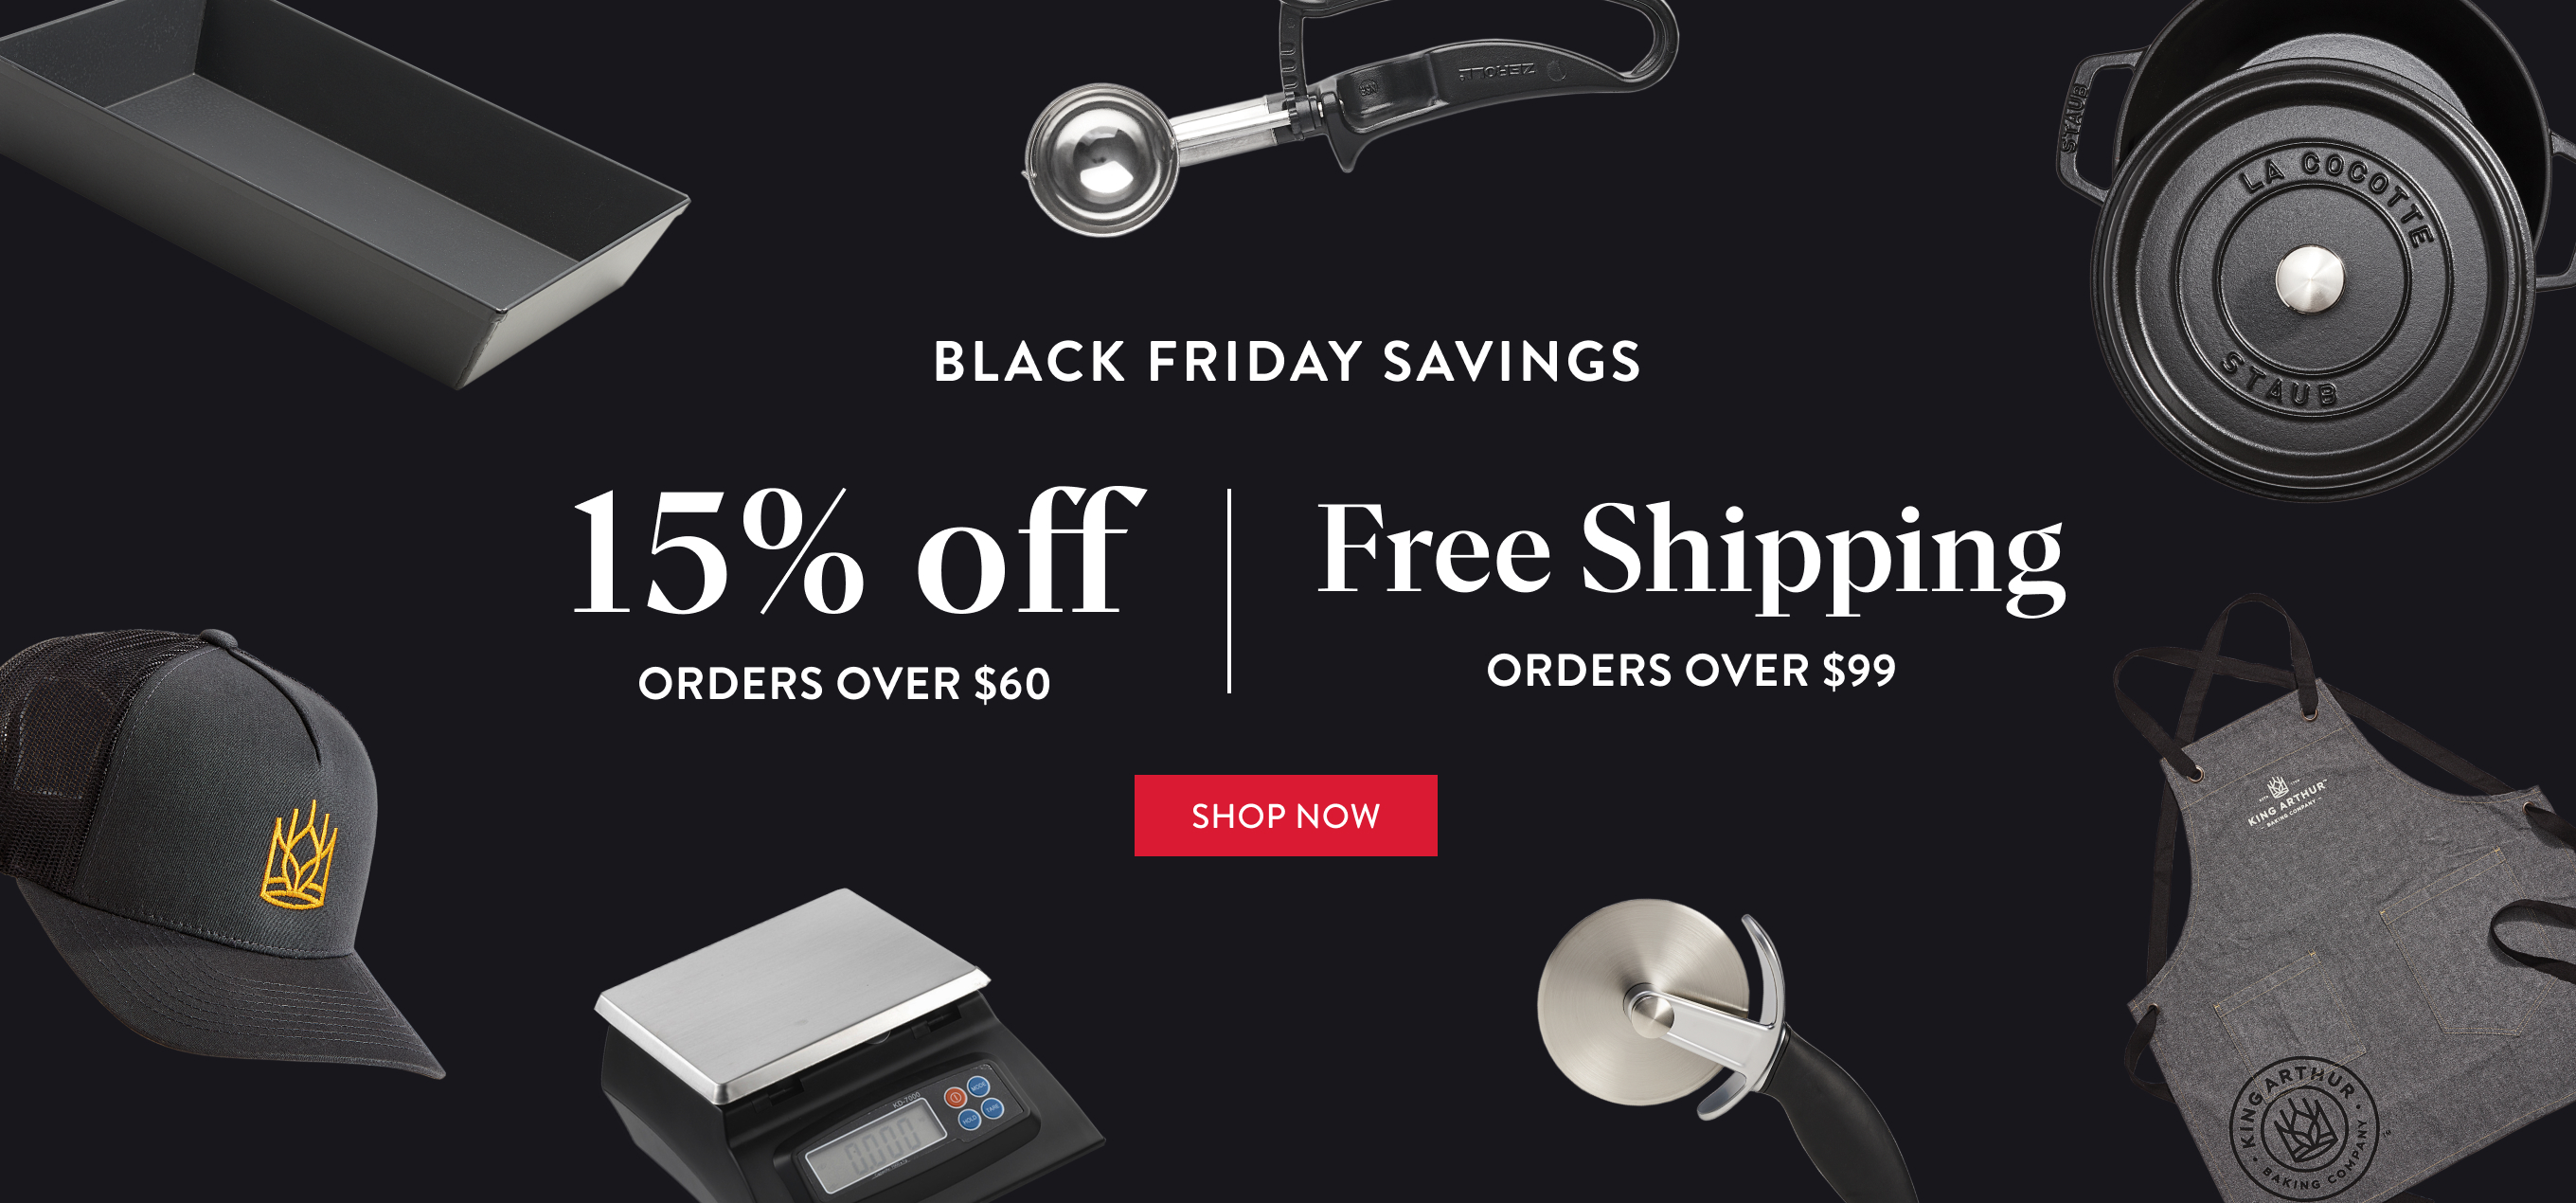 Spend $60, Save 15% - Spend $99, Free Shipping